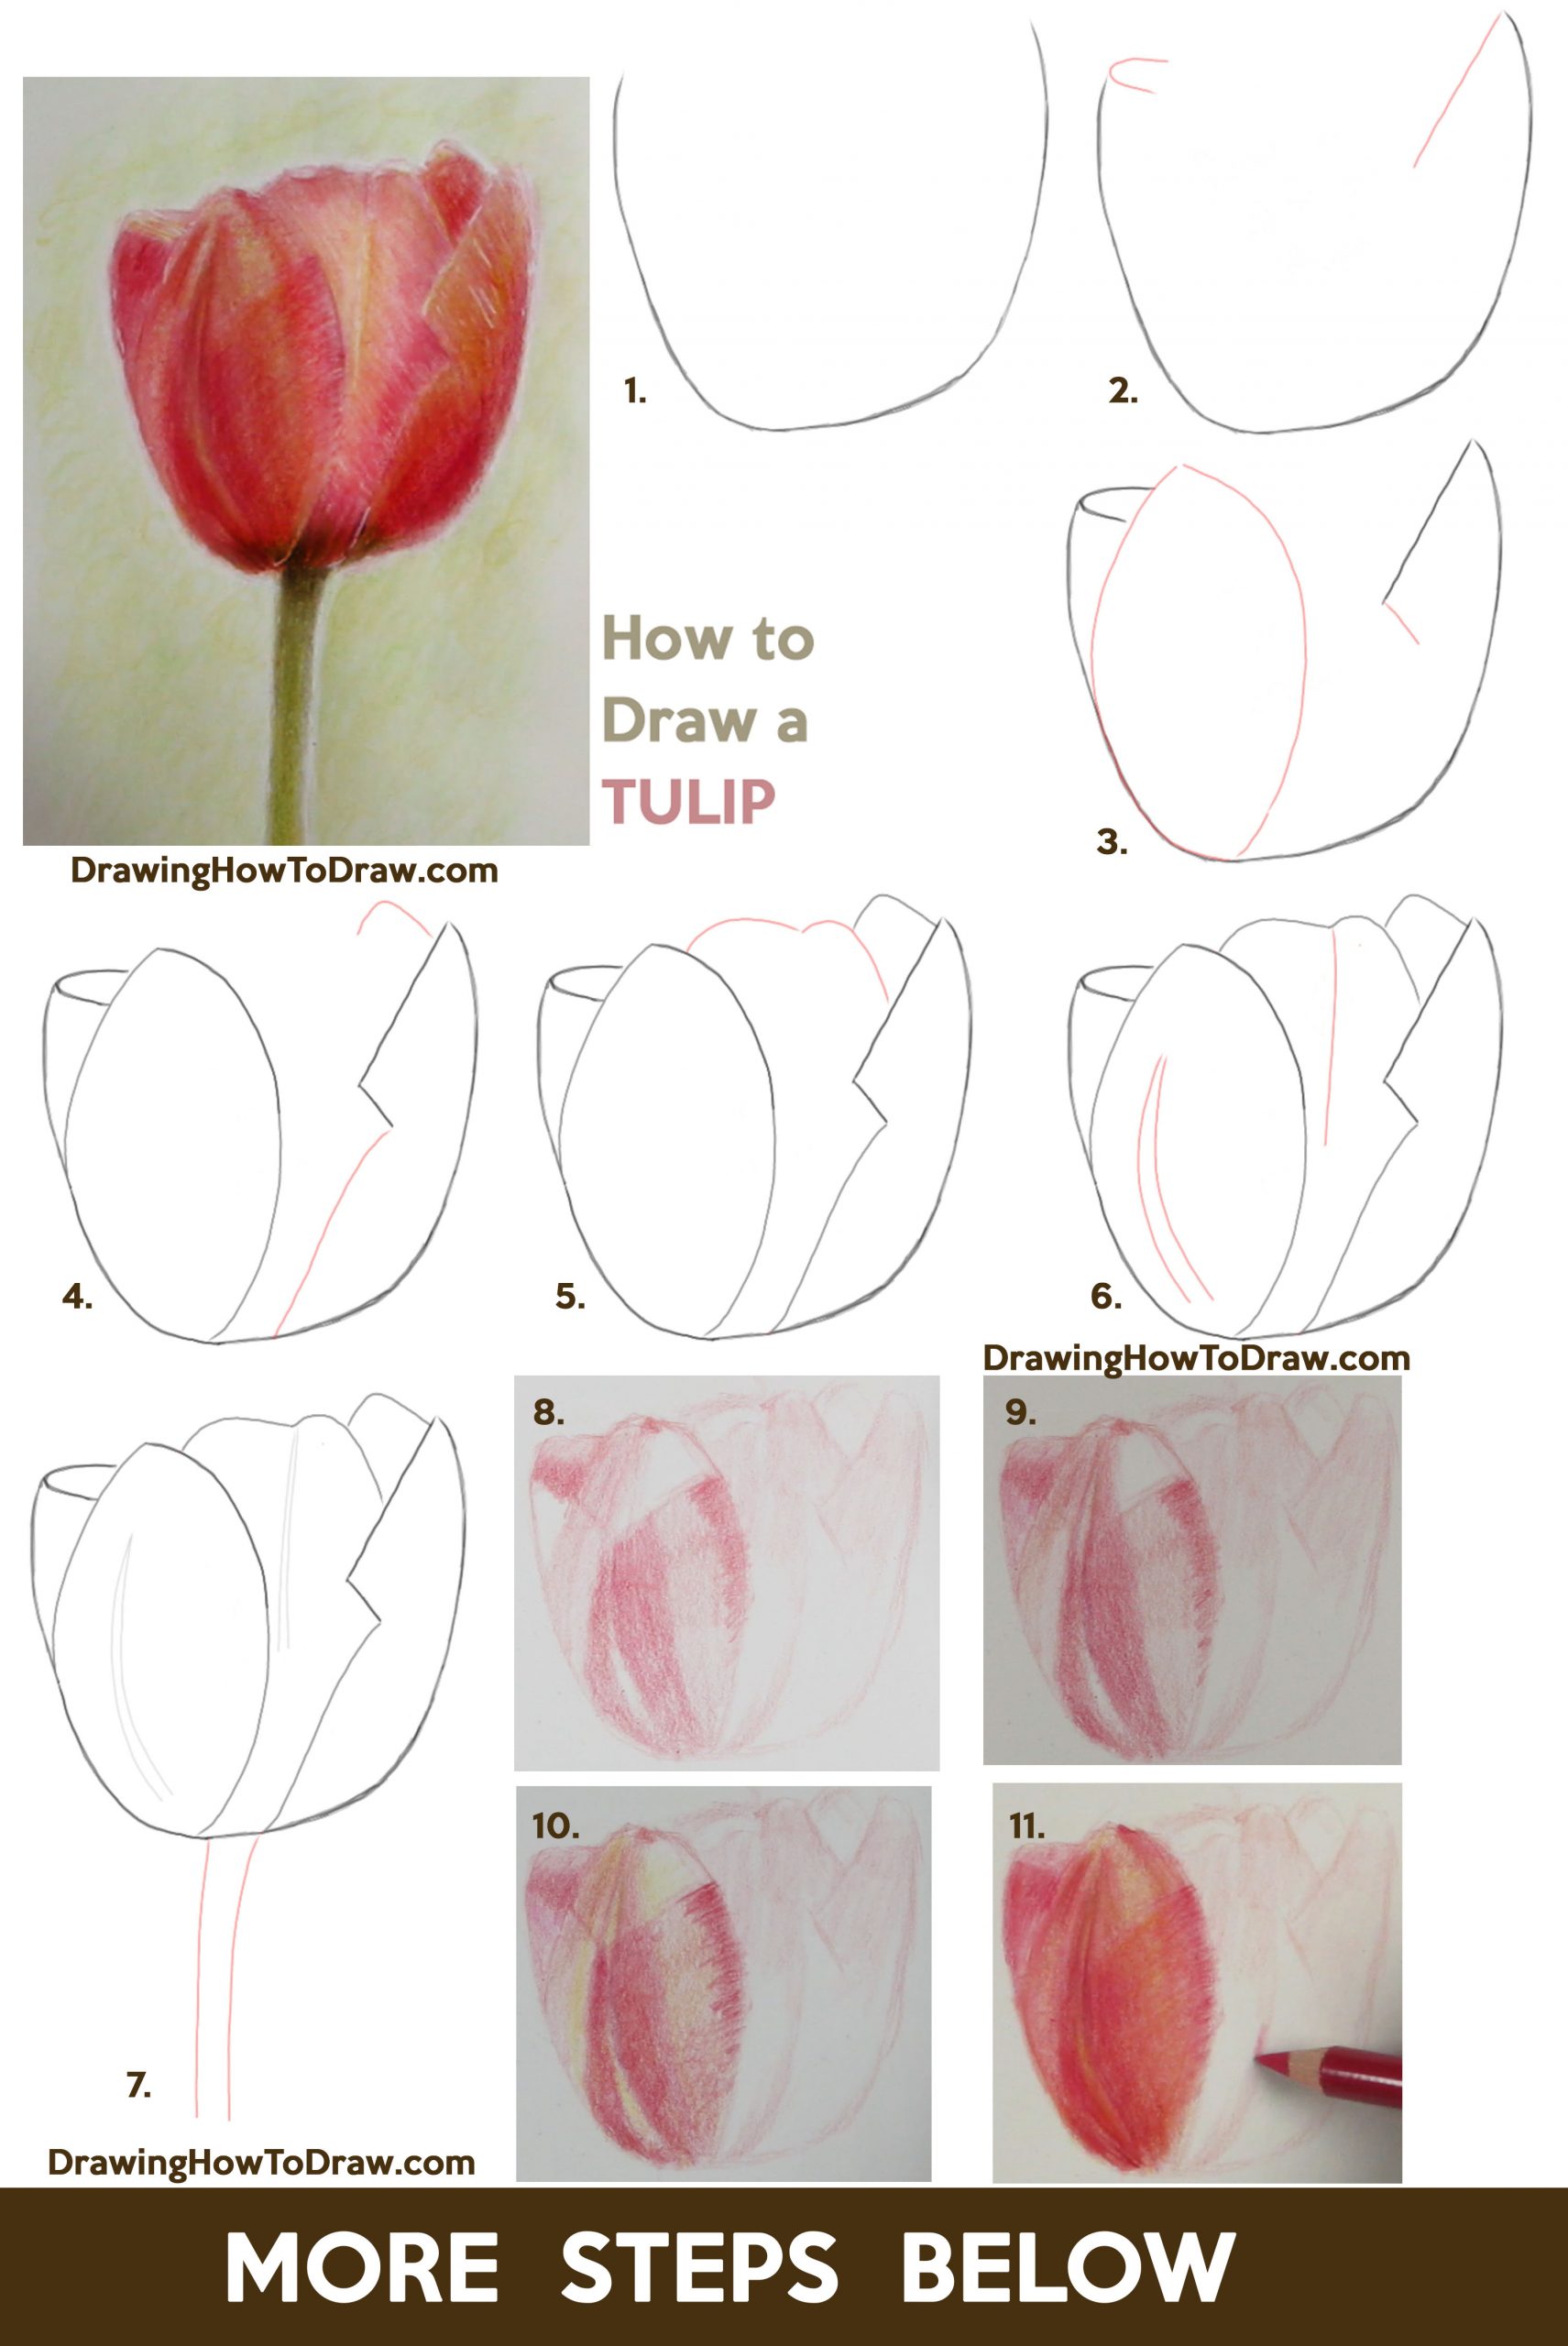 How To Draw A Tulip - Easy Step By Step Drawing Tutorial For